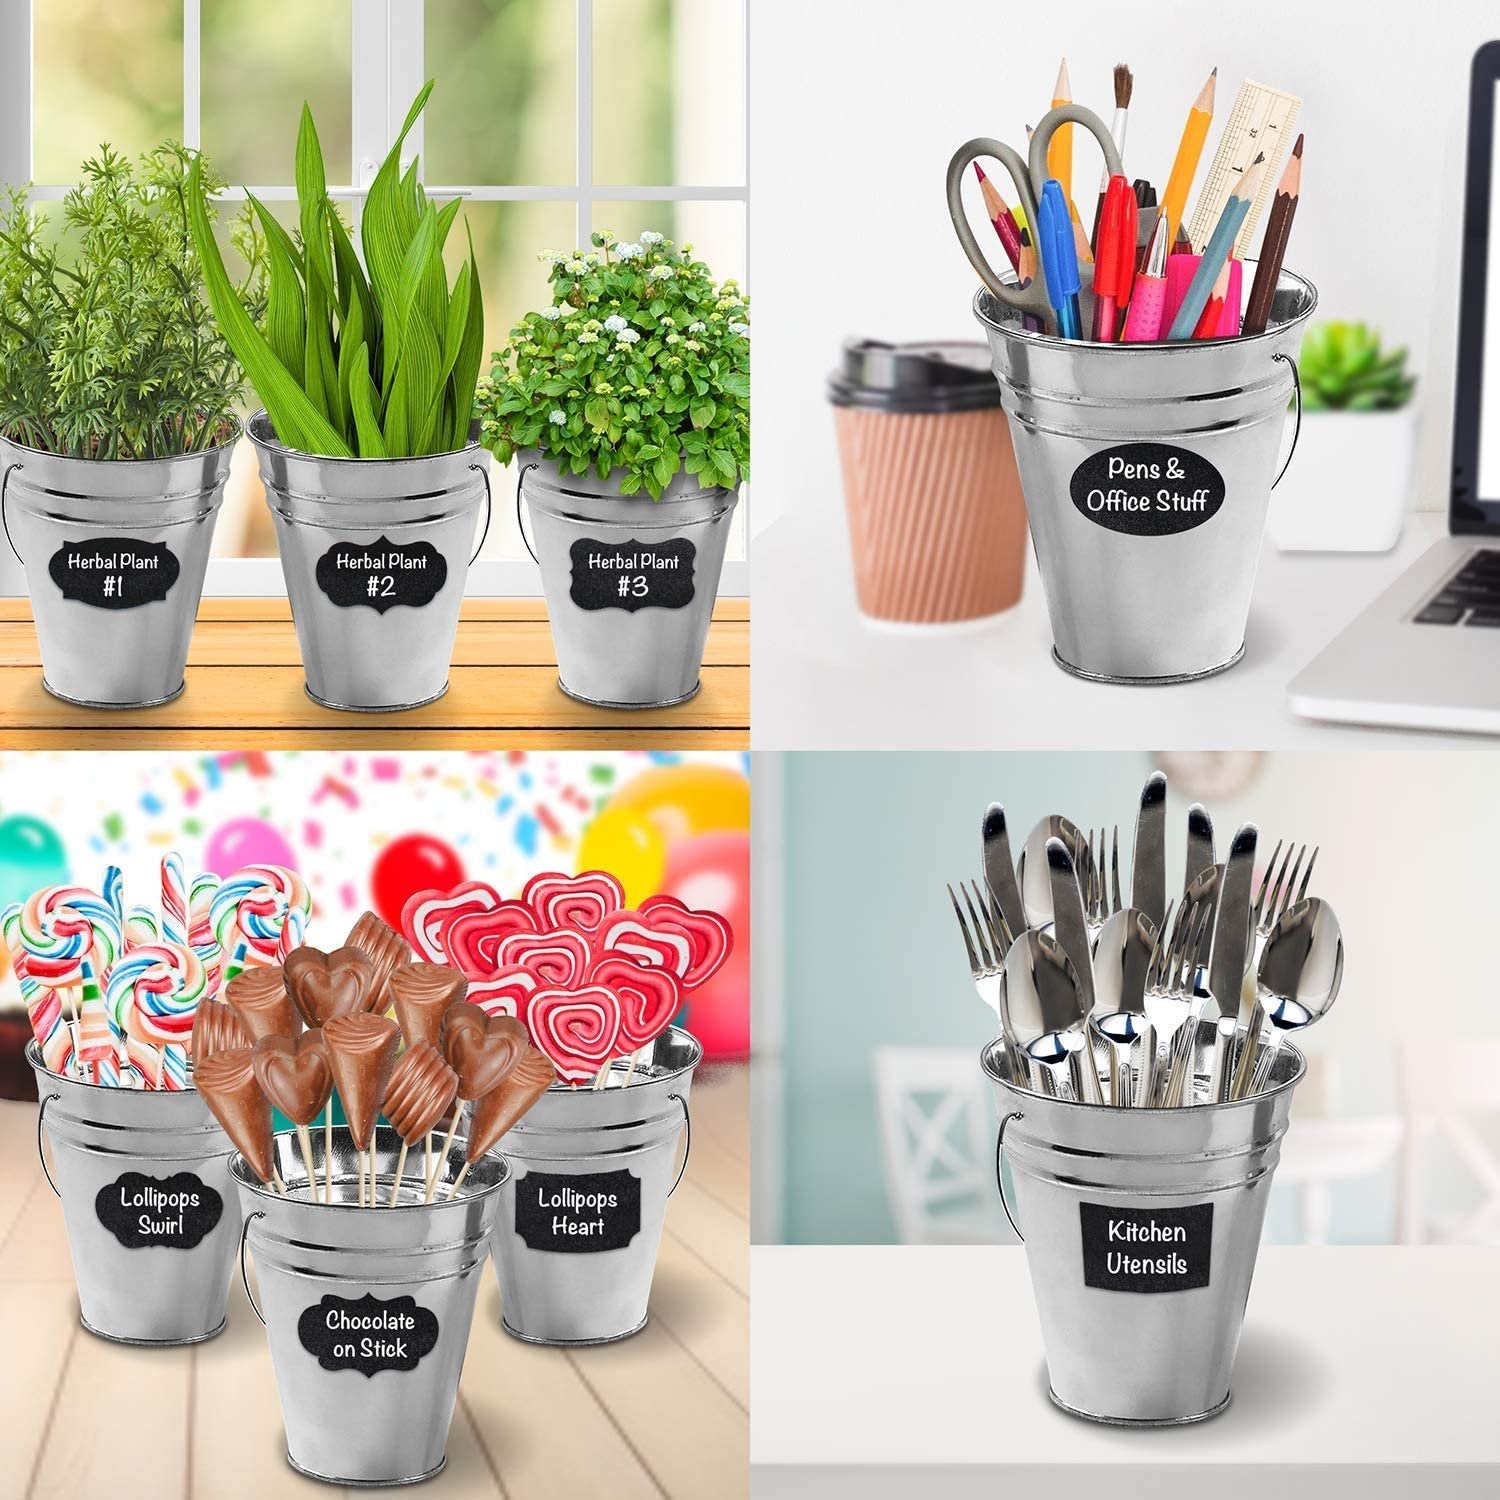 Large Galvanized Metal Buckets Set, Includes 12 Rustic Pails with Handles, 24 Chalkboard Labels and 1 Liquid Chalk Marker, 5" Galvanized Buckets for Party Favors, Wedding Decorations